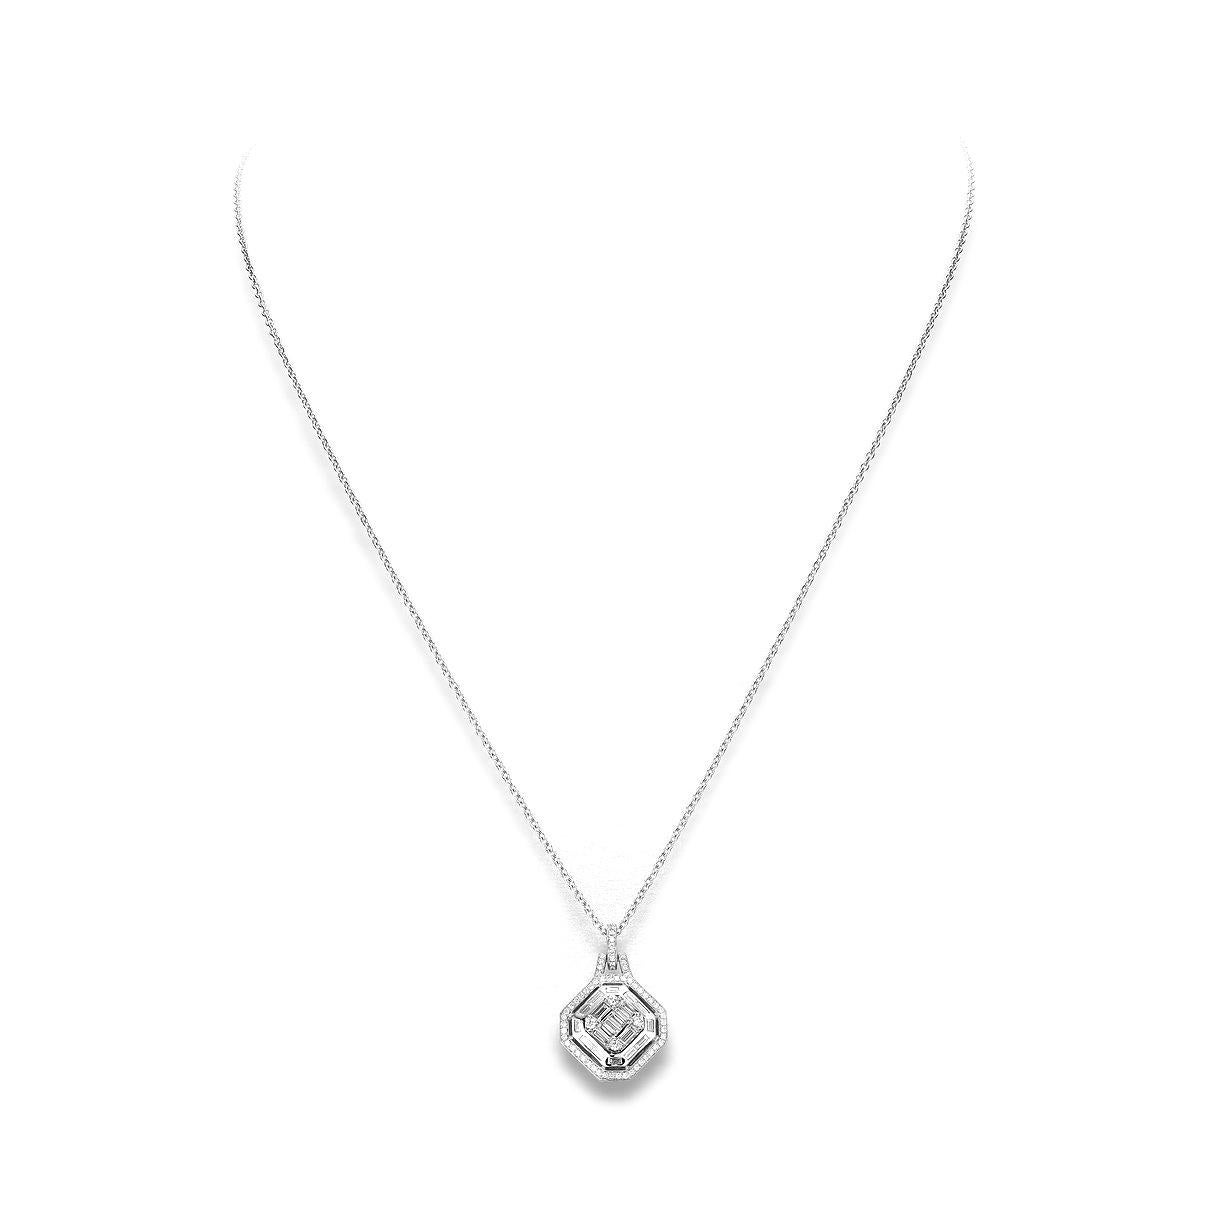 Pendant in 18kt white gold set with 65 diamonds 0.40 cts and 20 baguette cut diamonds 0.63 cts   